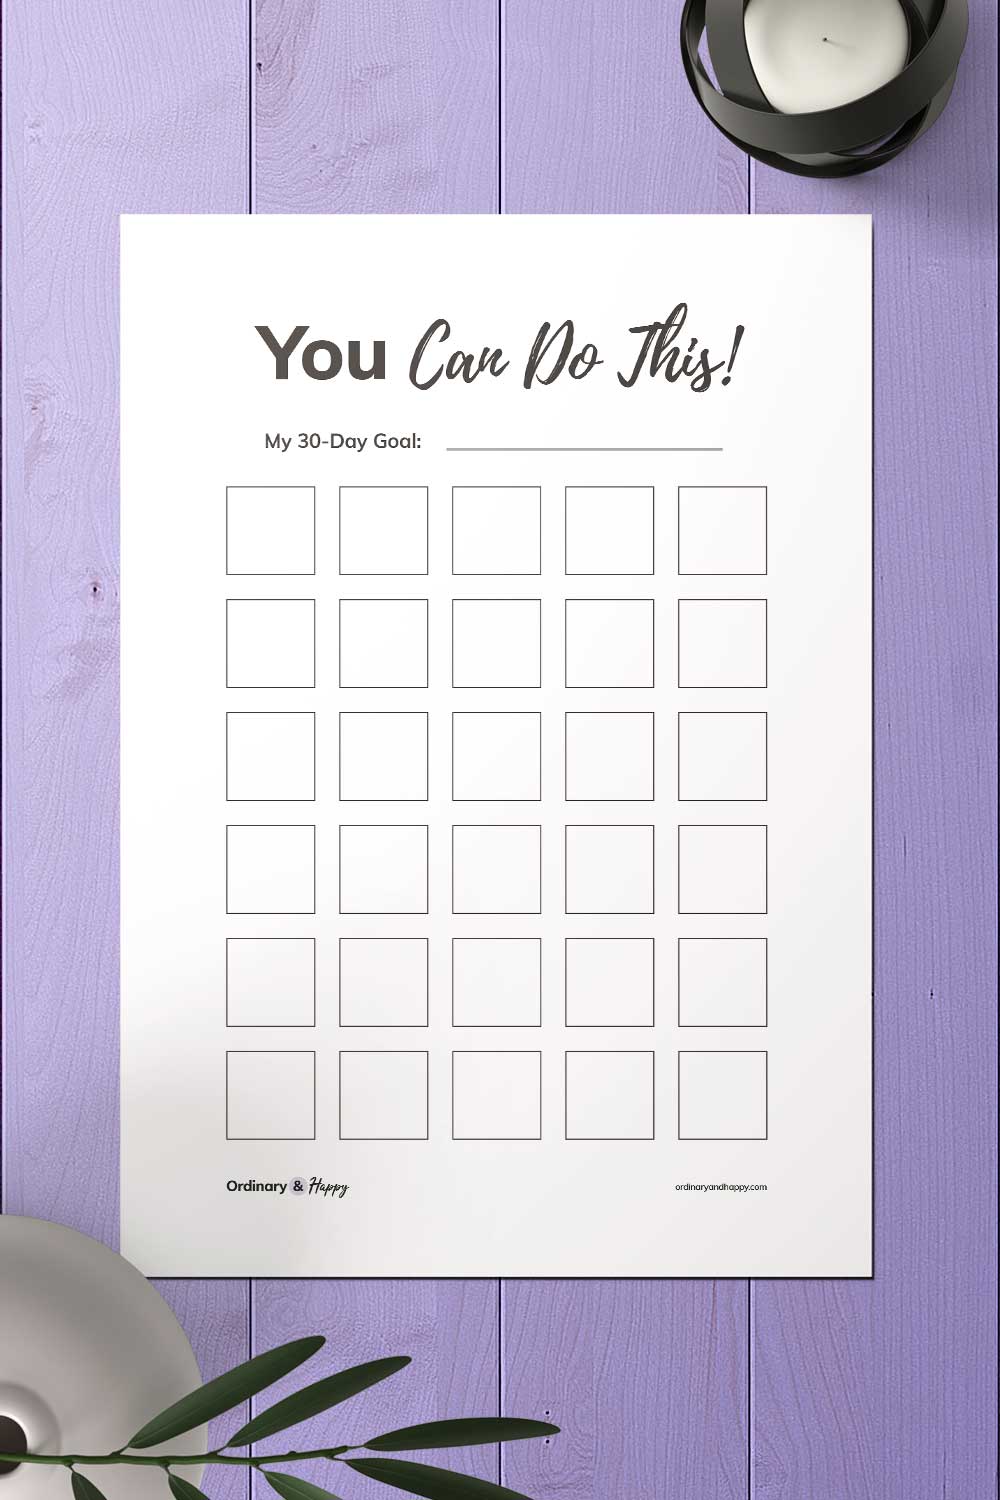 5-best-30-day-habit-tracker-printables-free-and-premium-ordinary